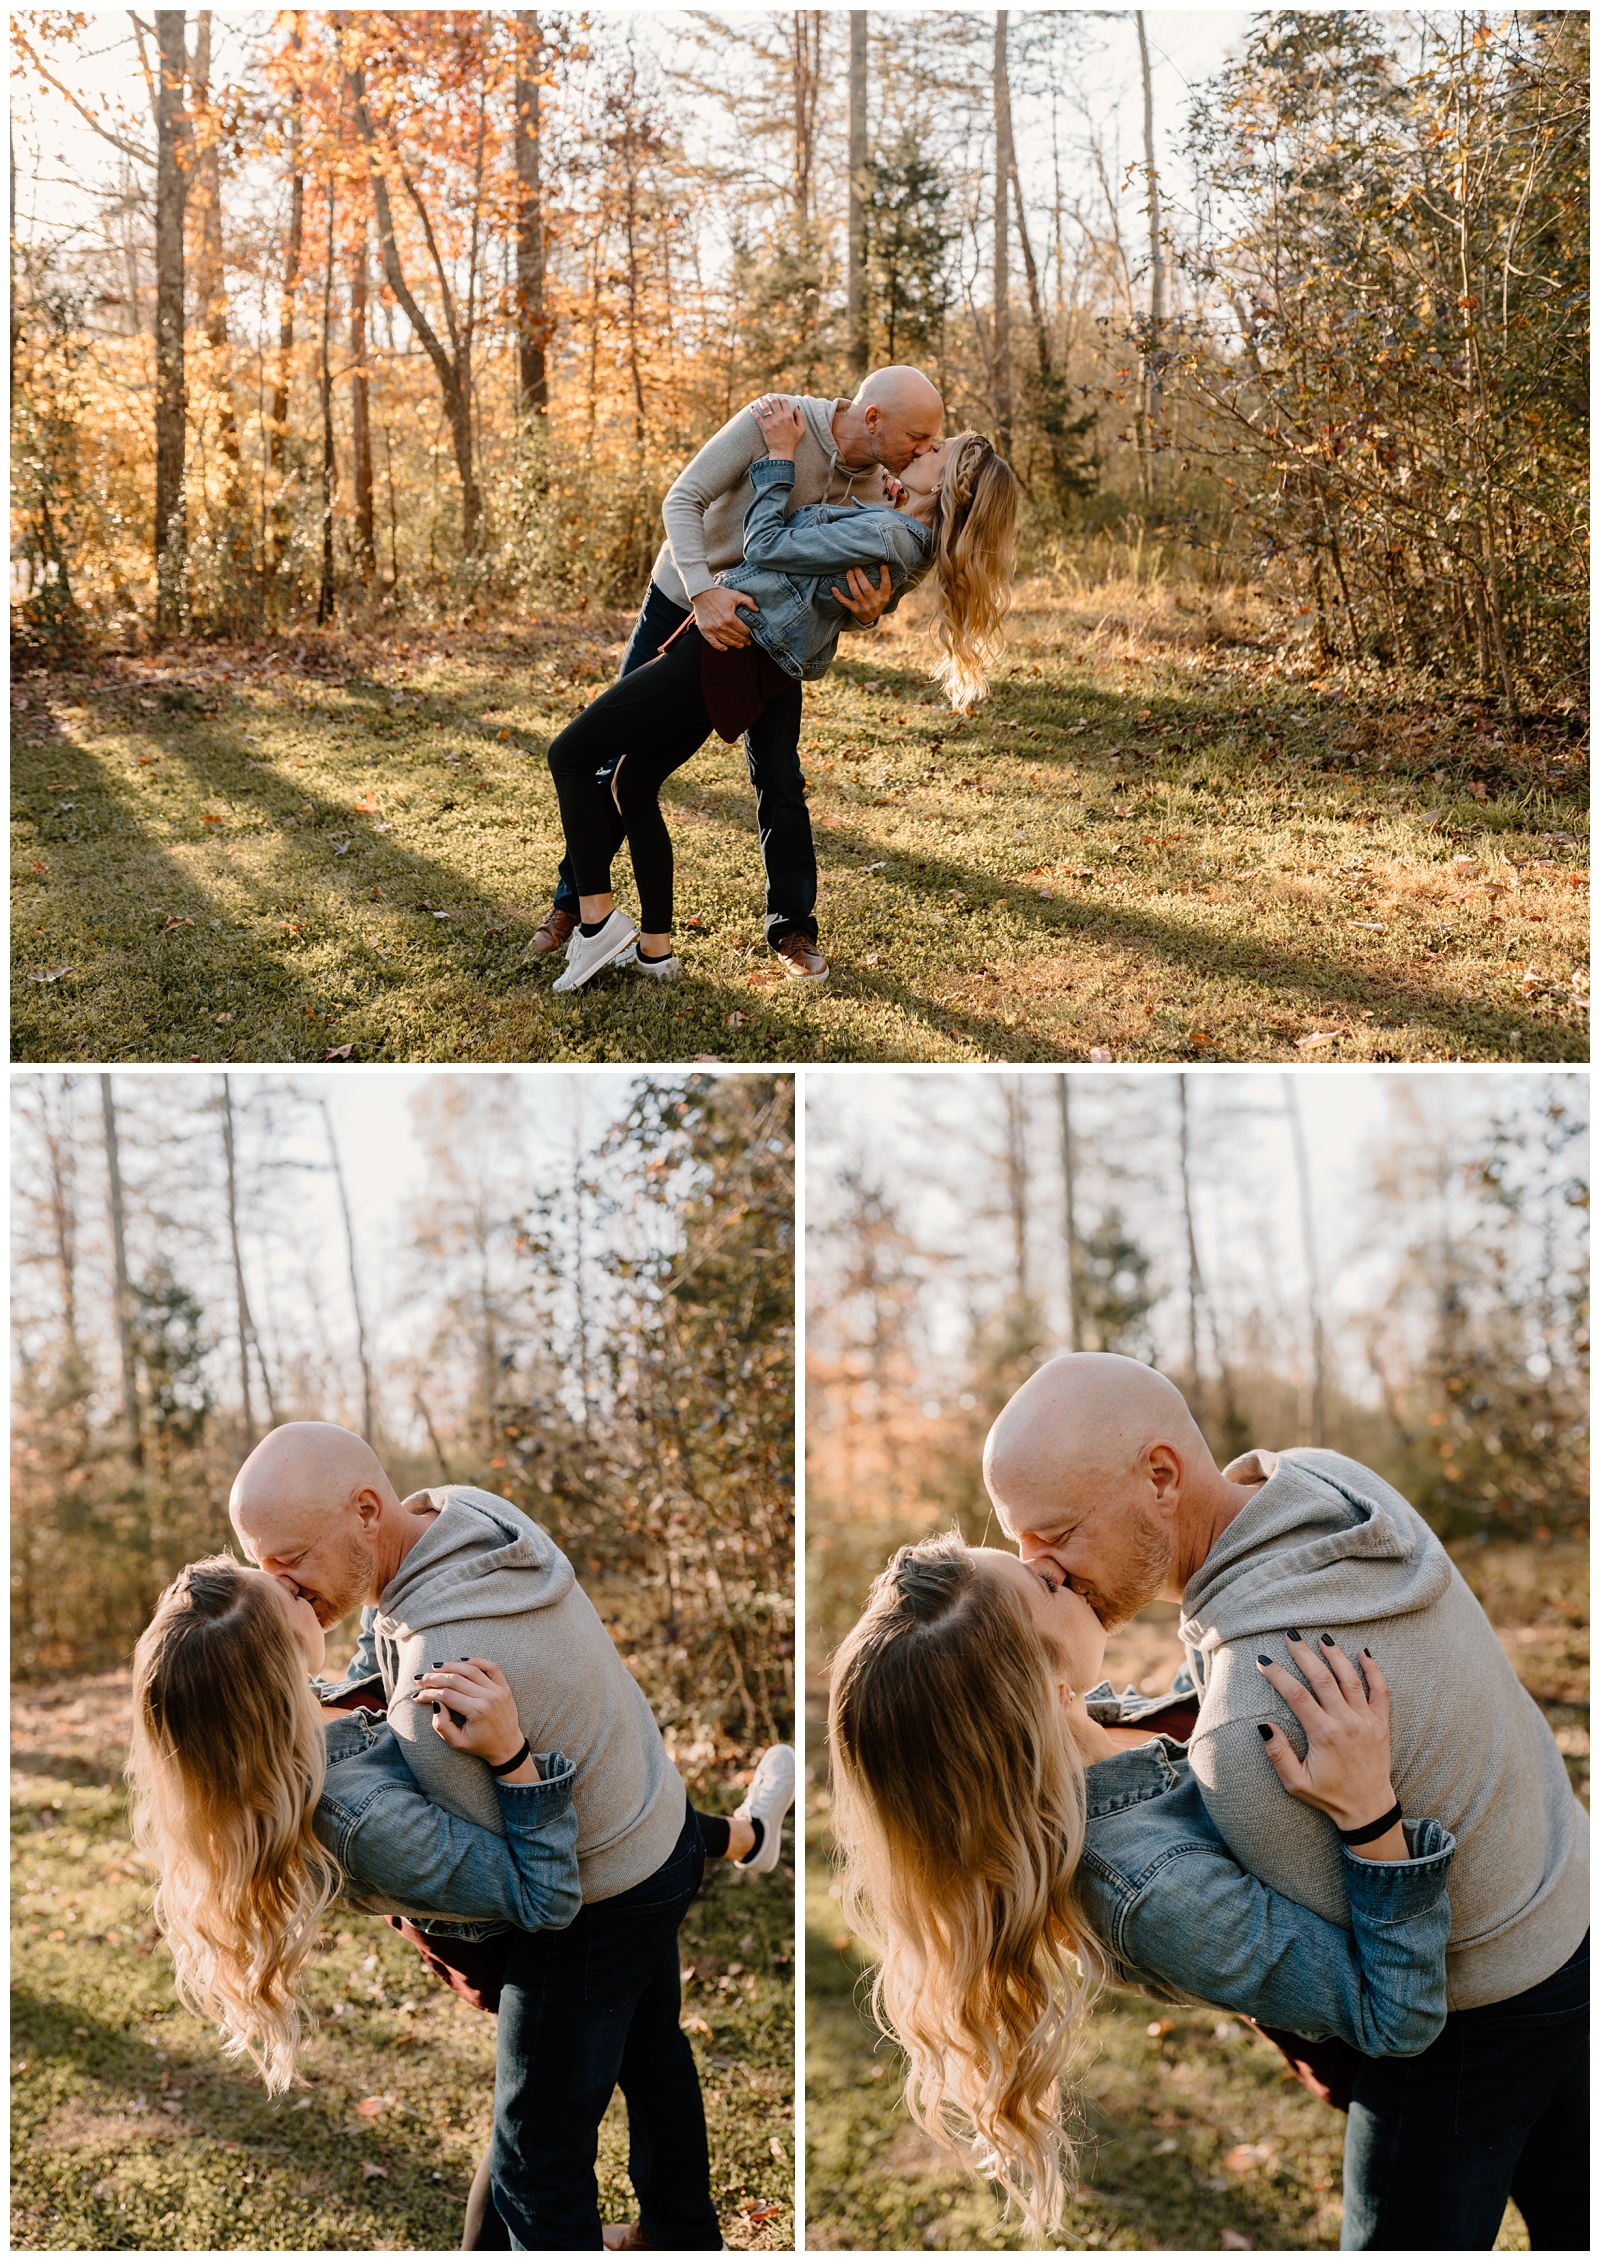 Fun, carefree engagement session in the woods by Greensboro, NC and North Carolina photographer